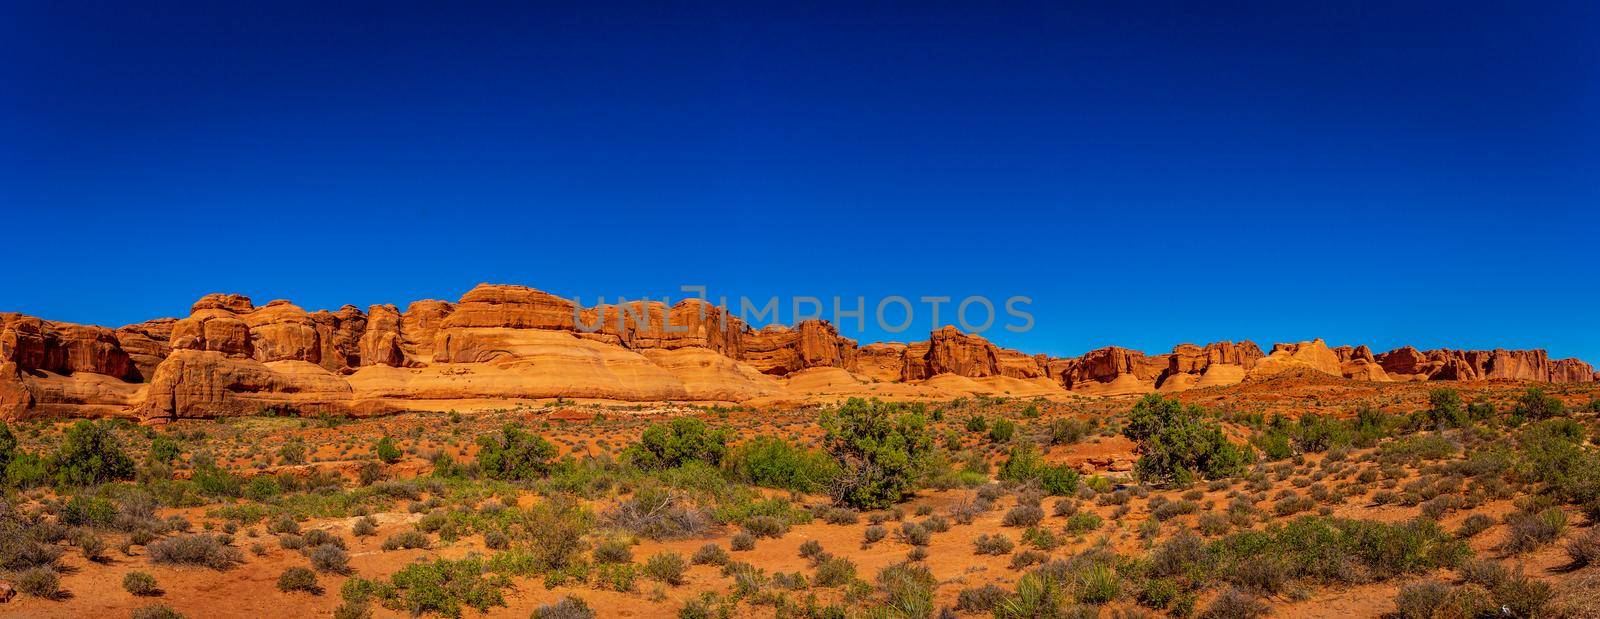 The Great Wall in Arches National Park by gepeng